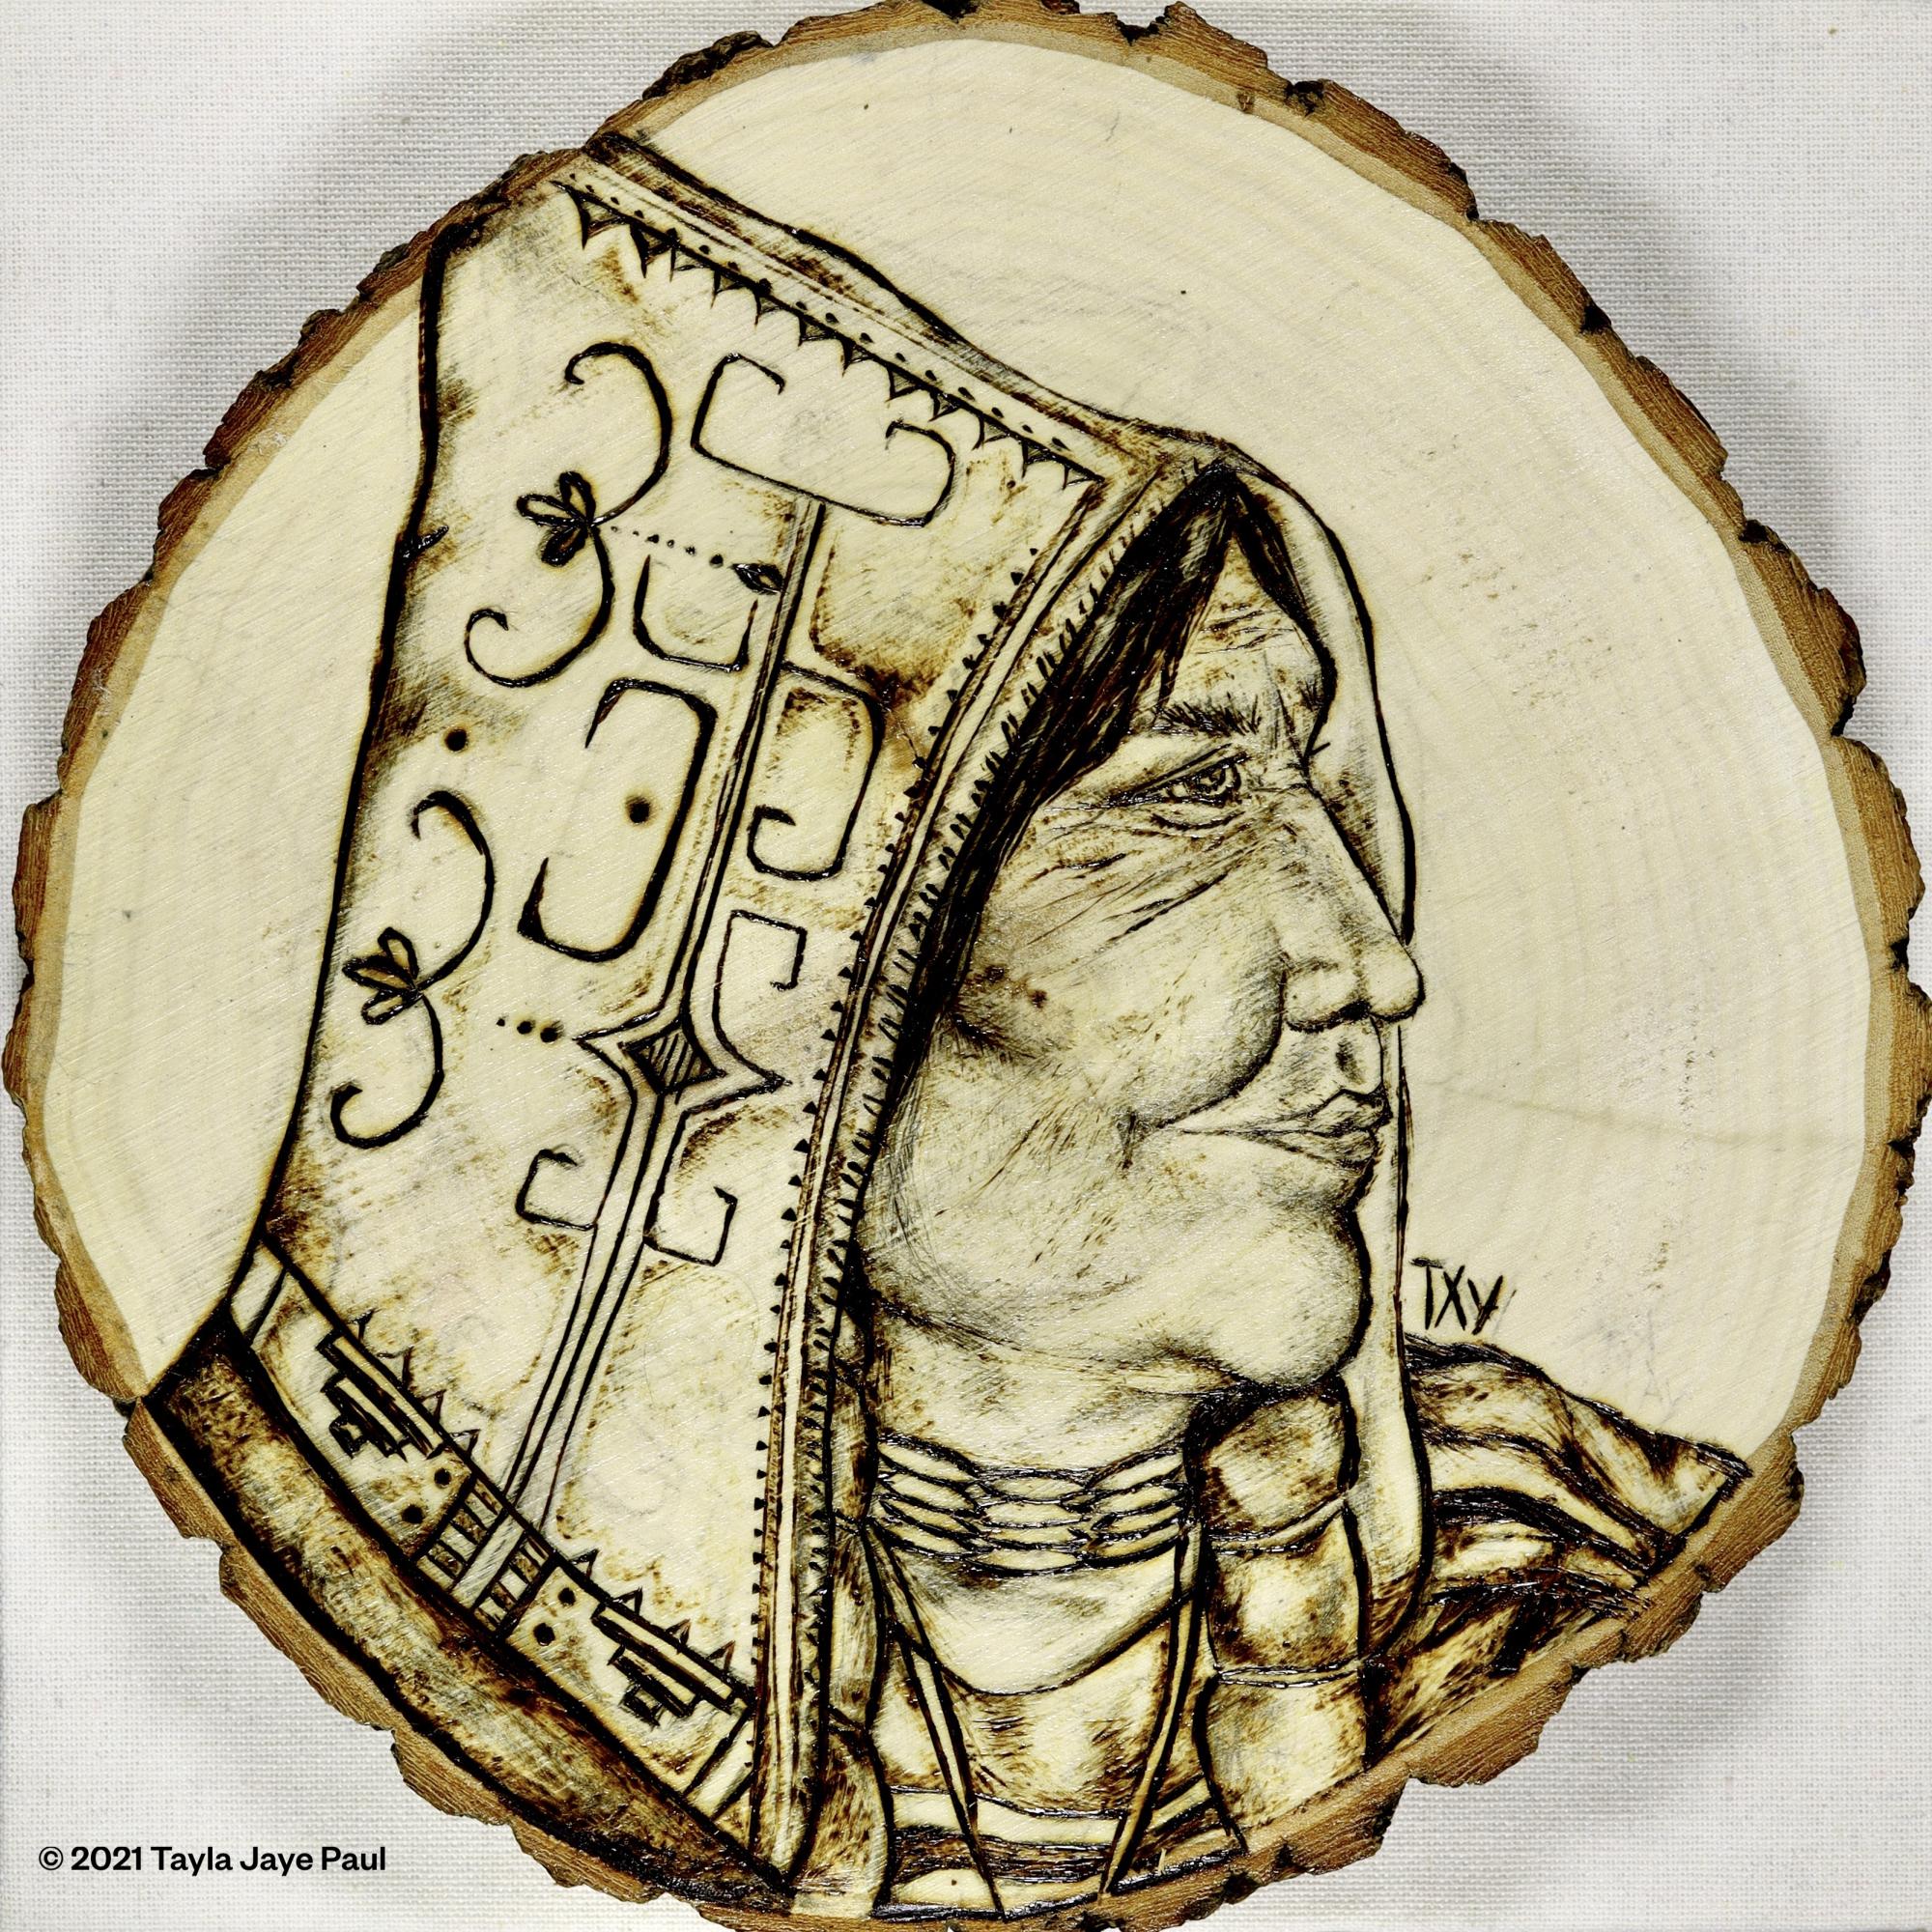 Circular wooden disk with woodburned illustration of the side profile of an older Mi'kmaw woman looking into the distance to the right. She is wearing a peaked cap with traditional double-curve designs 